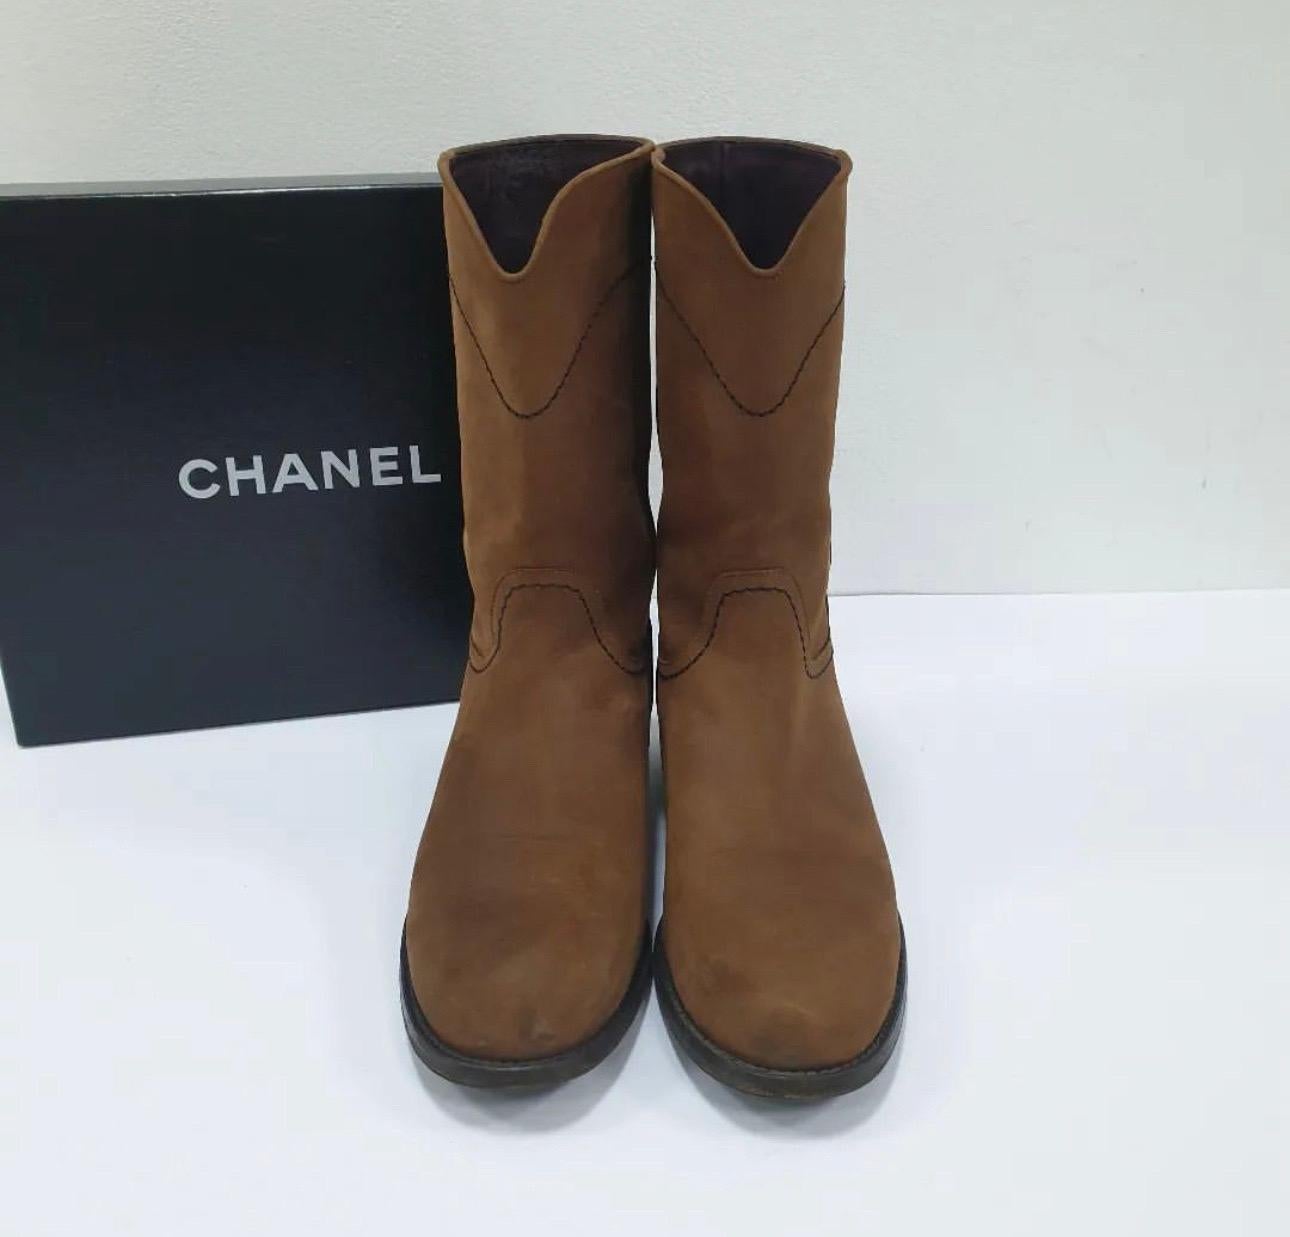 These Chanel Brown Nubuck Leather CC Cowboy Flat Boots Size will make your transition into winter a piece of cake! Always a classic, the cowboy boot is a versatile investment for your wardrobe. These casual and fun boots will look fabulous with a